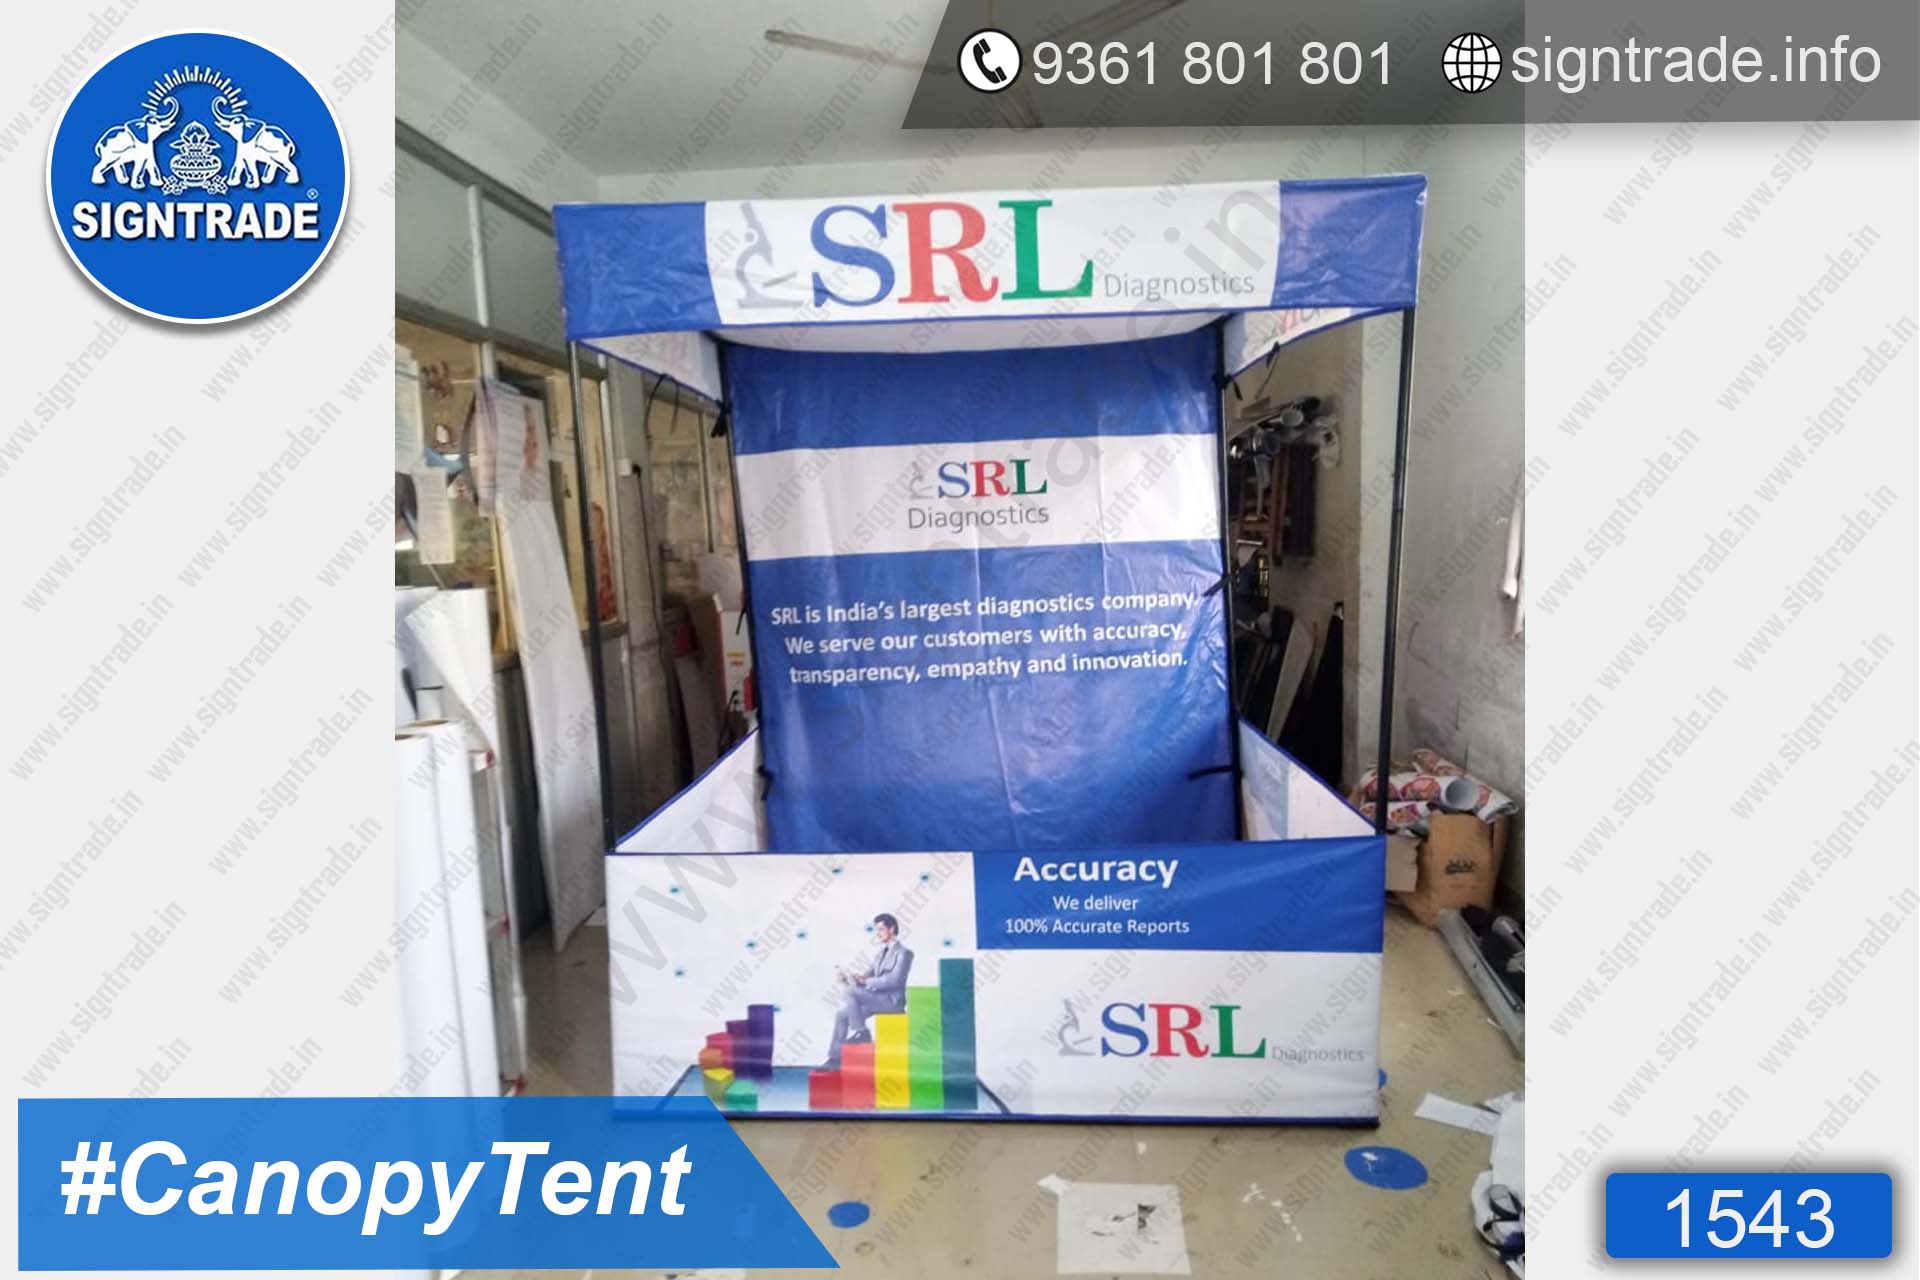 SRL Diagnostics - SIGNTRADE - Canopy Tent Manufactures in Chennai